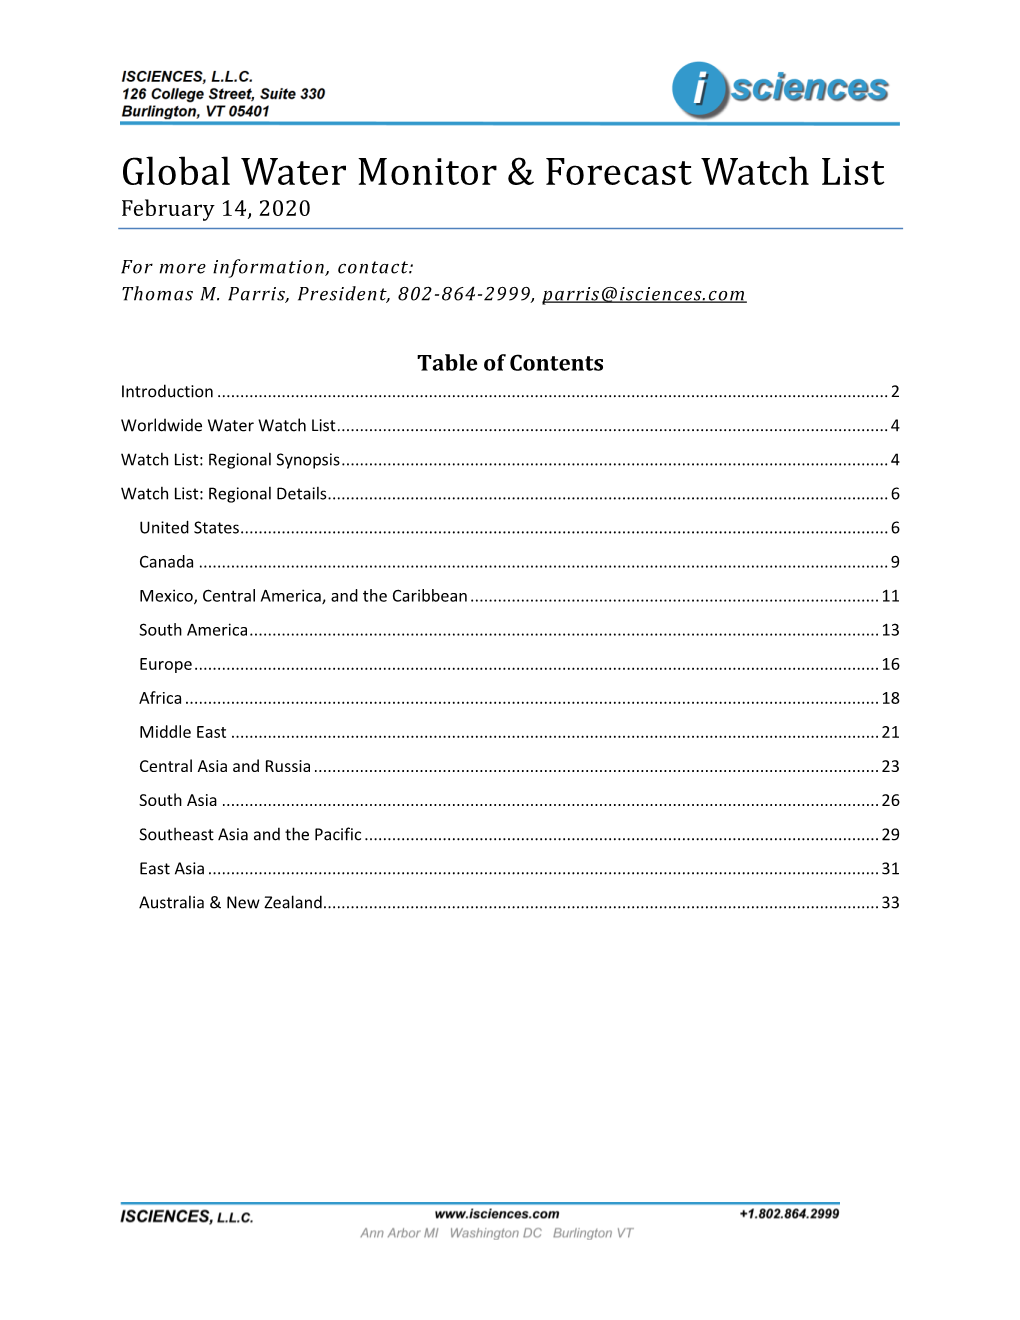 Isciences Global Water Monitor & Forecast February 14, 2020